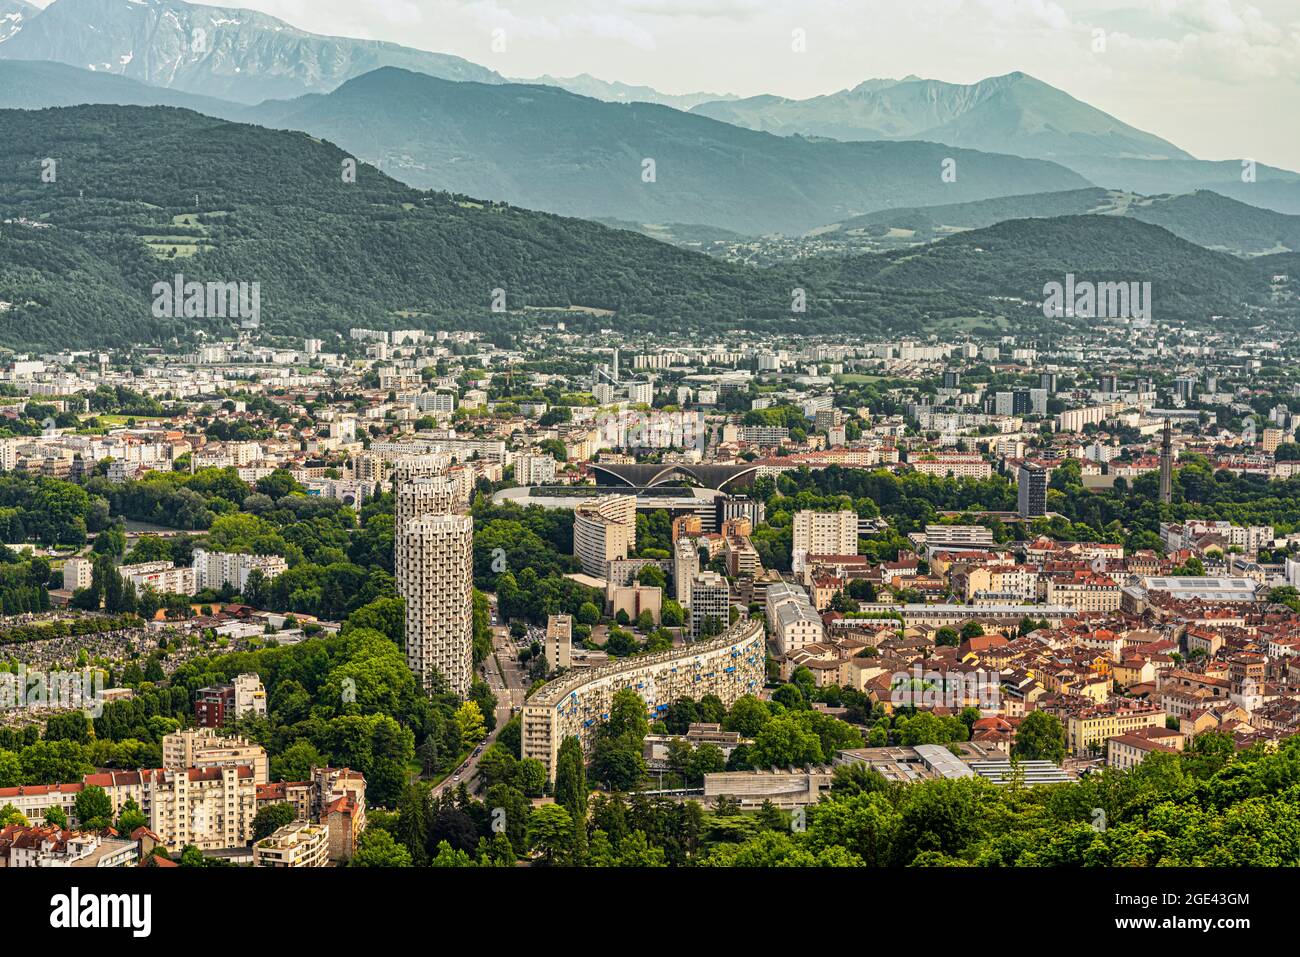 The city of Grenoble is present in all the events of French history. Today it is the center of various social and scientific advances.Grenoble, France Stock Photo